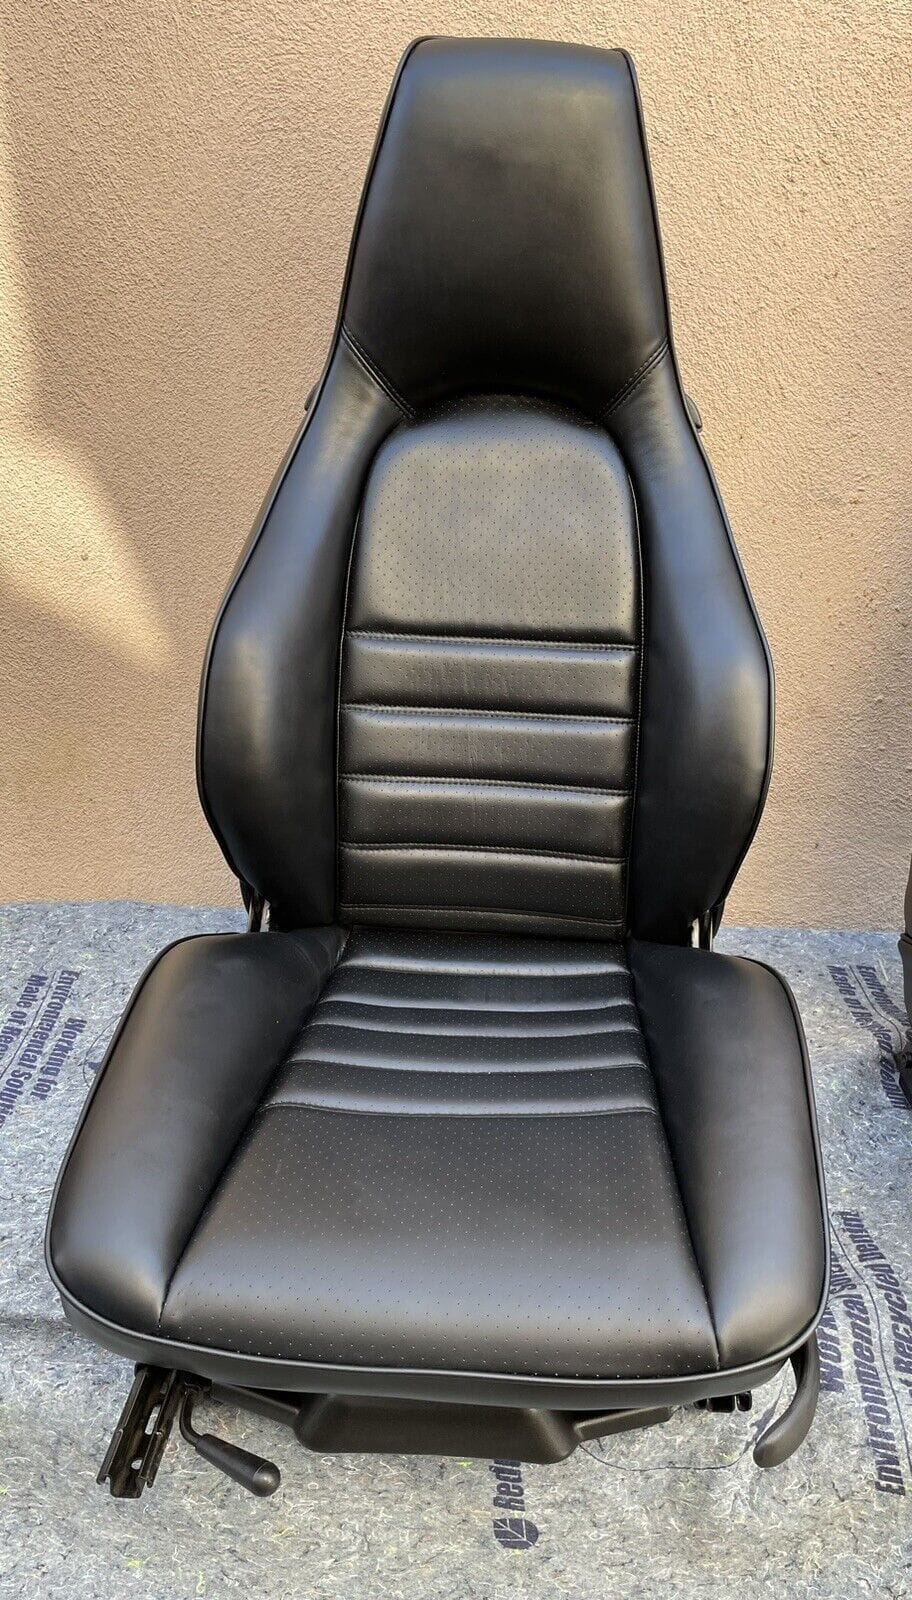 Interior/Upholstery - Porsche 964, 965, C4, OEM Sport Seats by Larts - New - 1988 to 1994 Porsche 911 - South Gate, CA 90280, United States